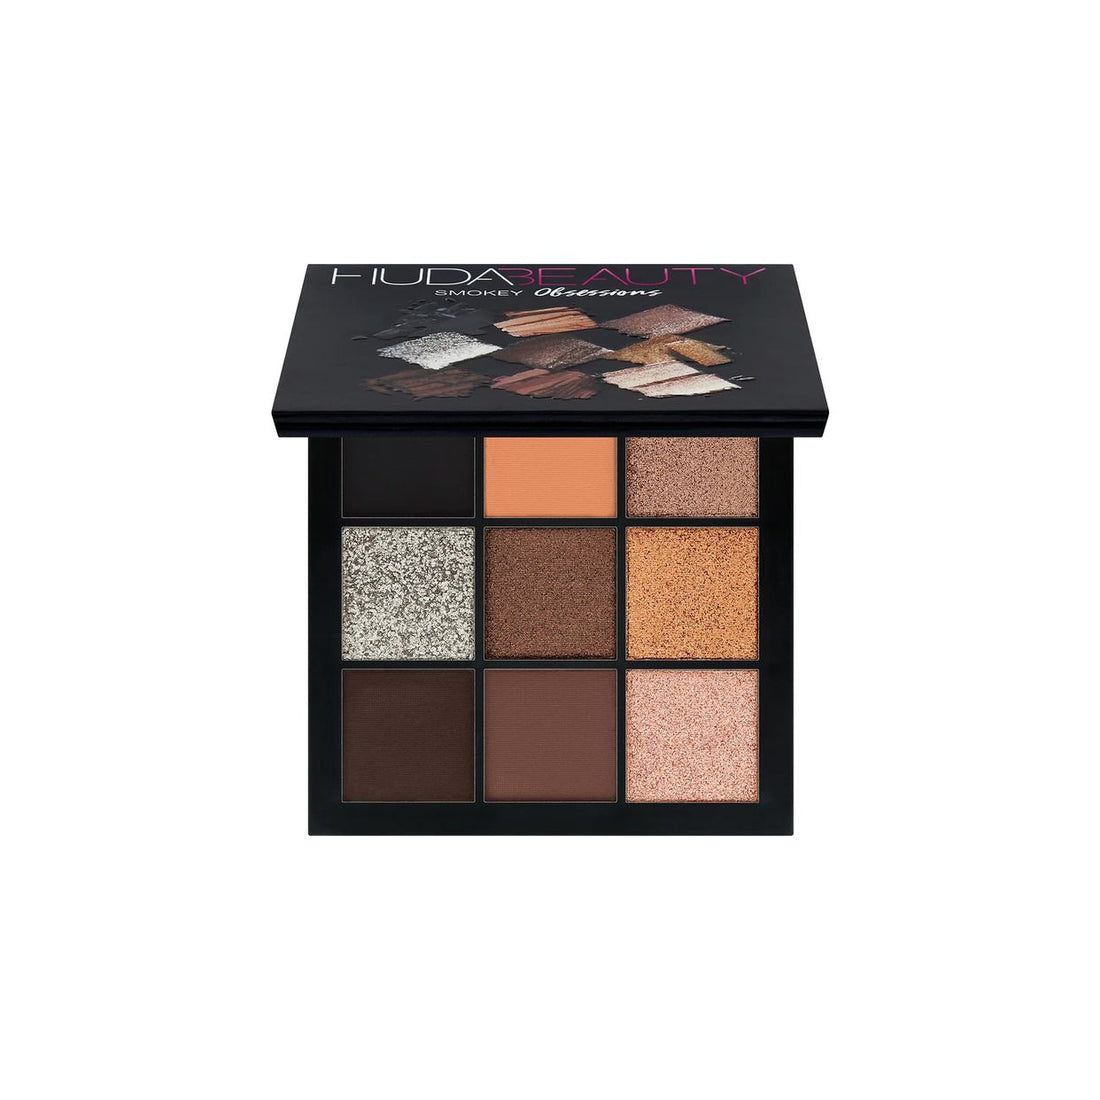 Obsessions Palette-Smokey